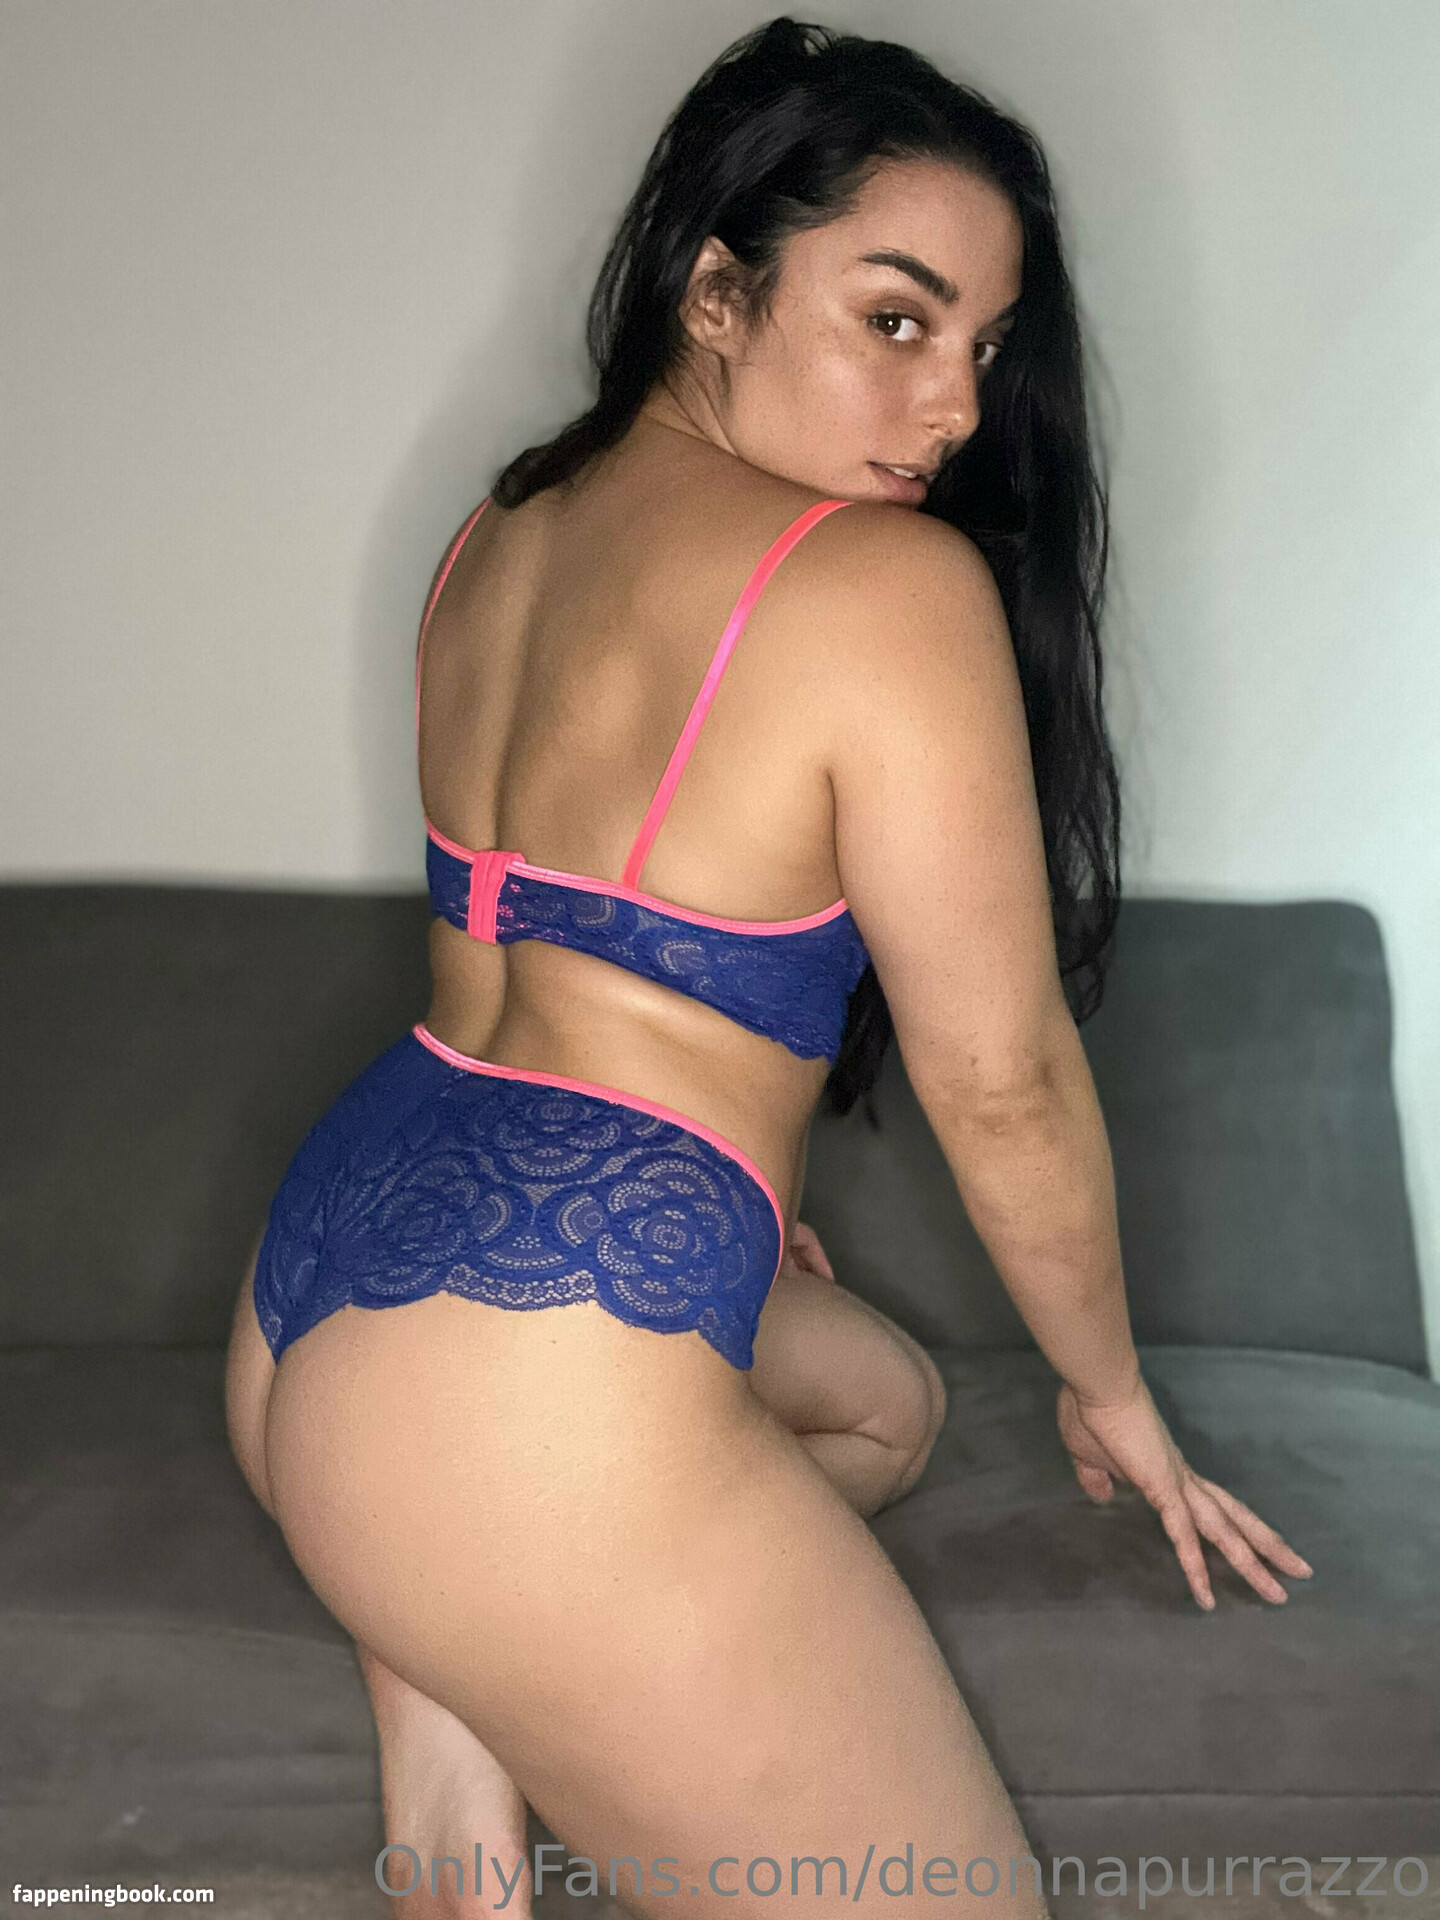 Deonna Purrazzo Deonnapurrazzo Nude Onlyfans Leaks The Fappening